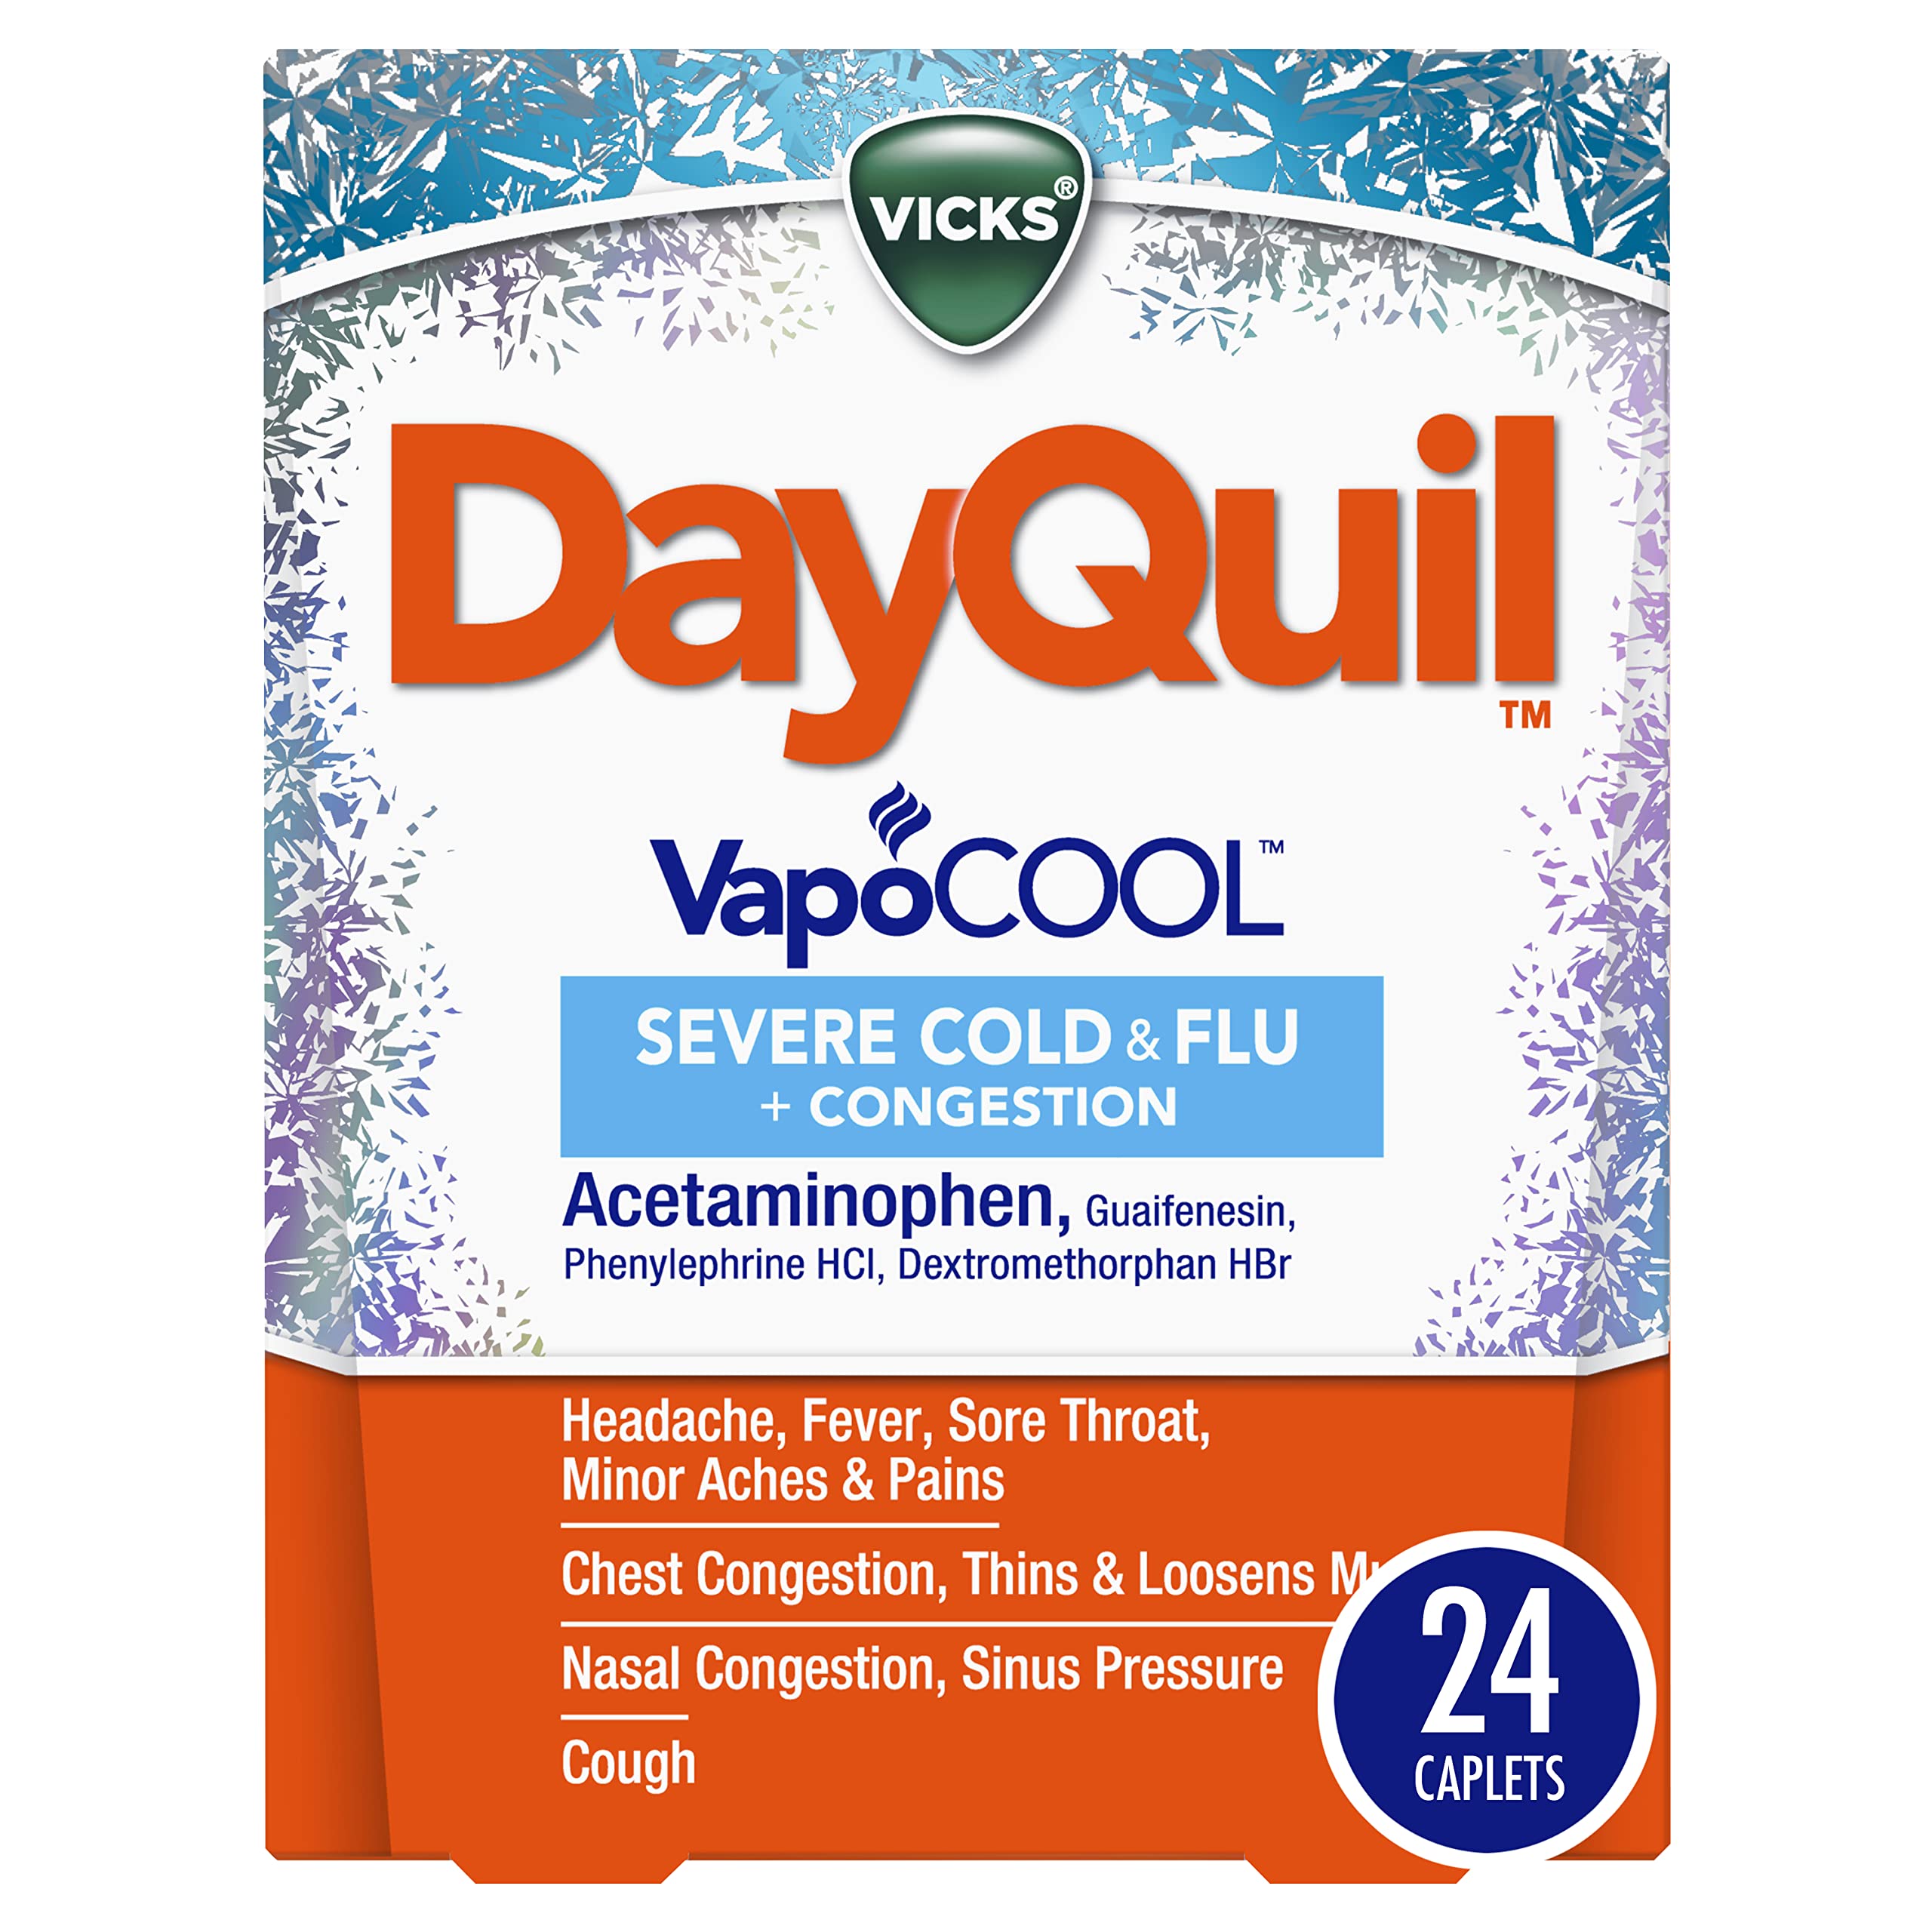 Vicks DayQuil VapoCOOL SEVERE Cold & Flu + Congestion Medicine, Non-Drowsy Max Strength 9-Symptom Relief for Fever, Sore Throat, Chest Congestion, Stuffy Nose, Nasal Congestion, Cough, 24 Caplets